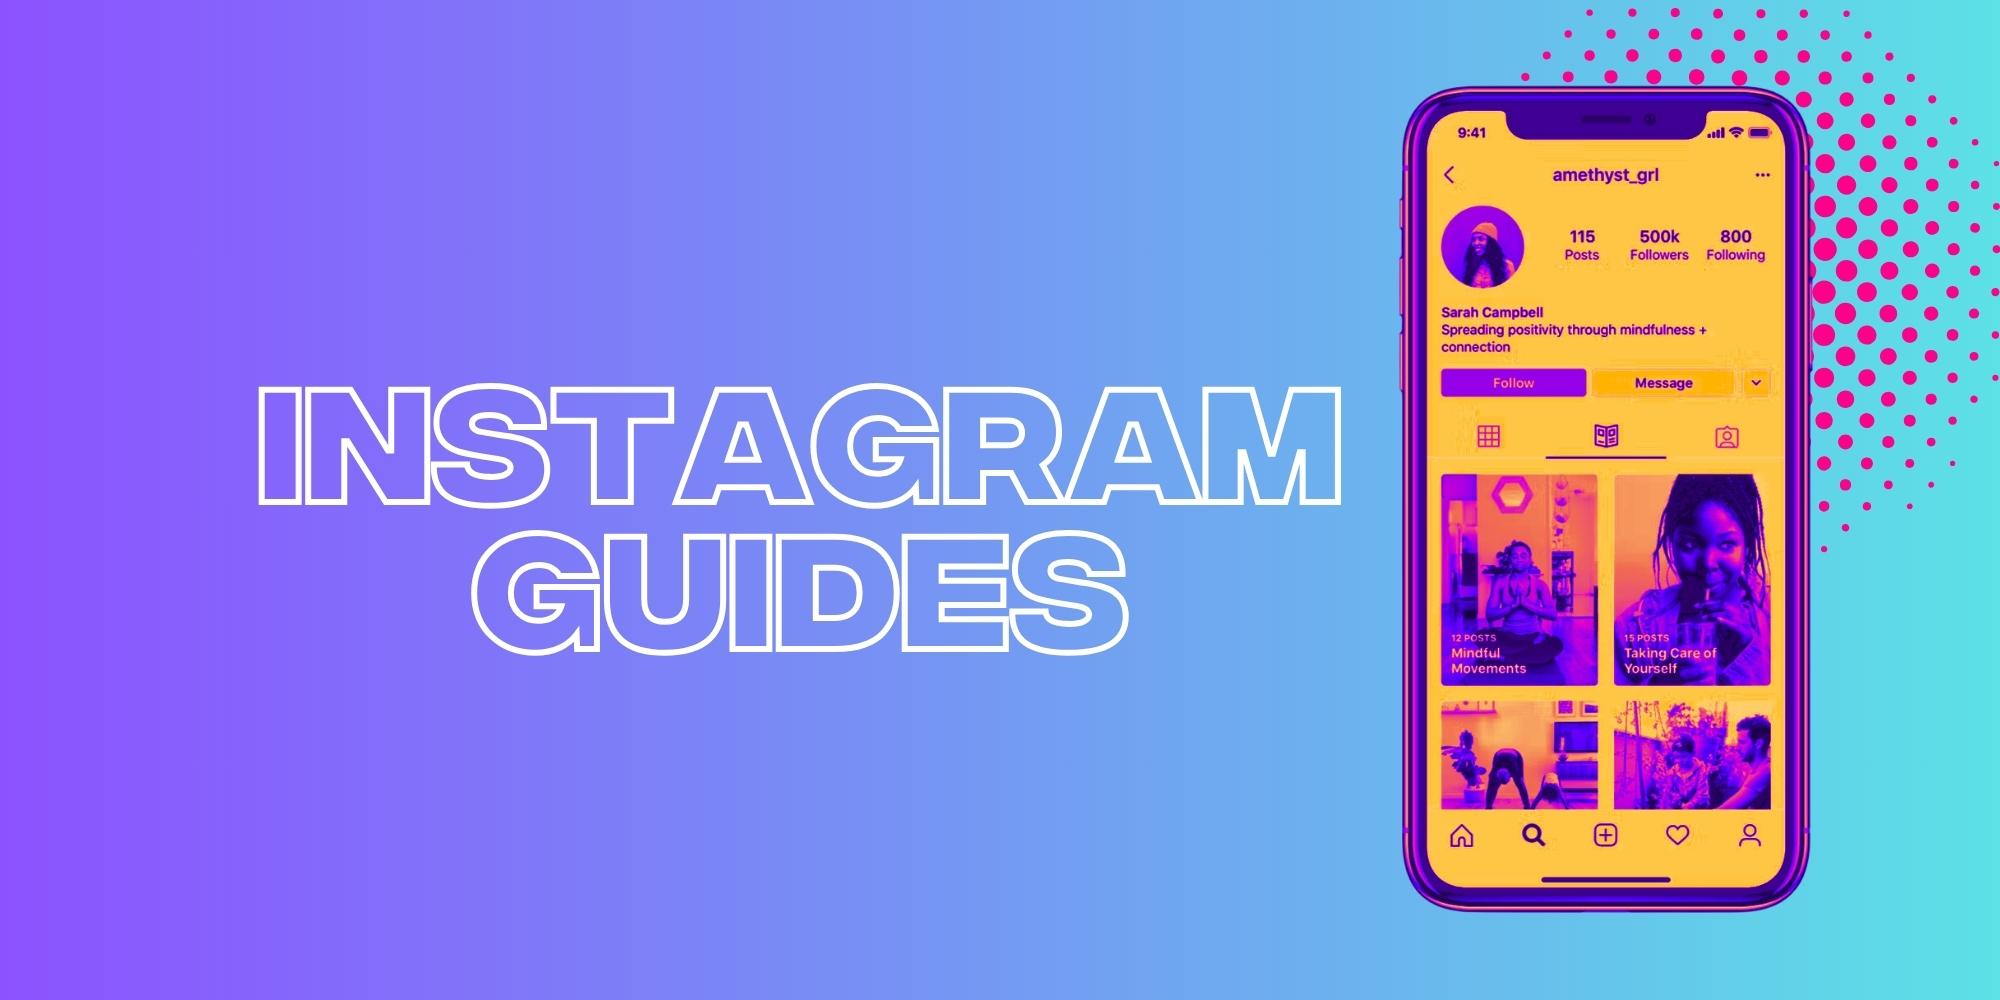 How To Use Instagram Guides